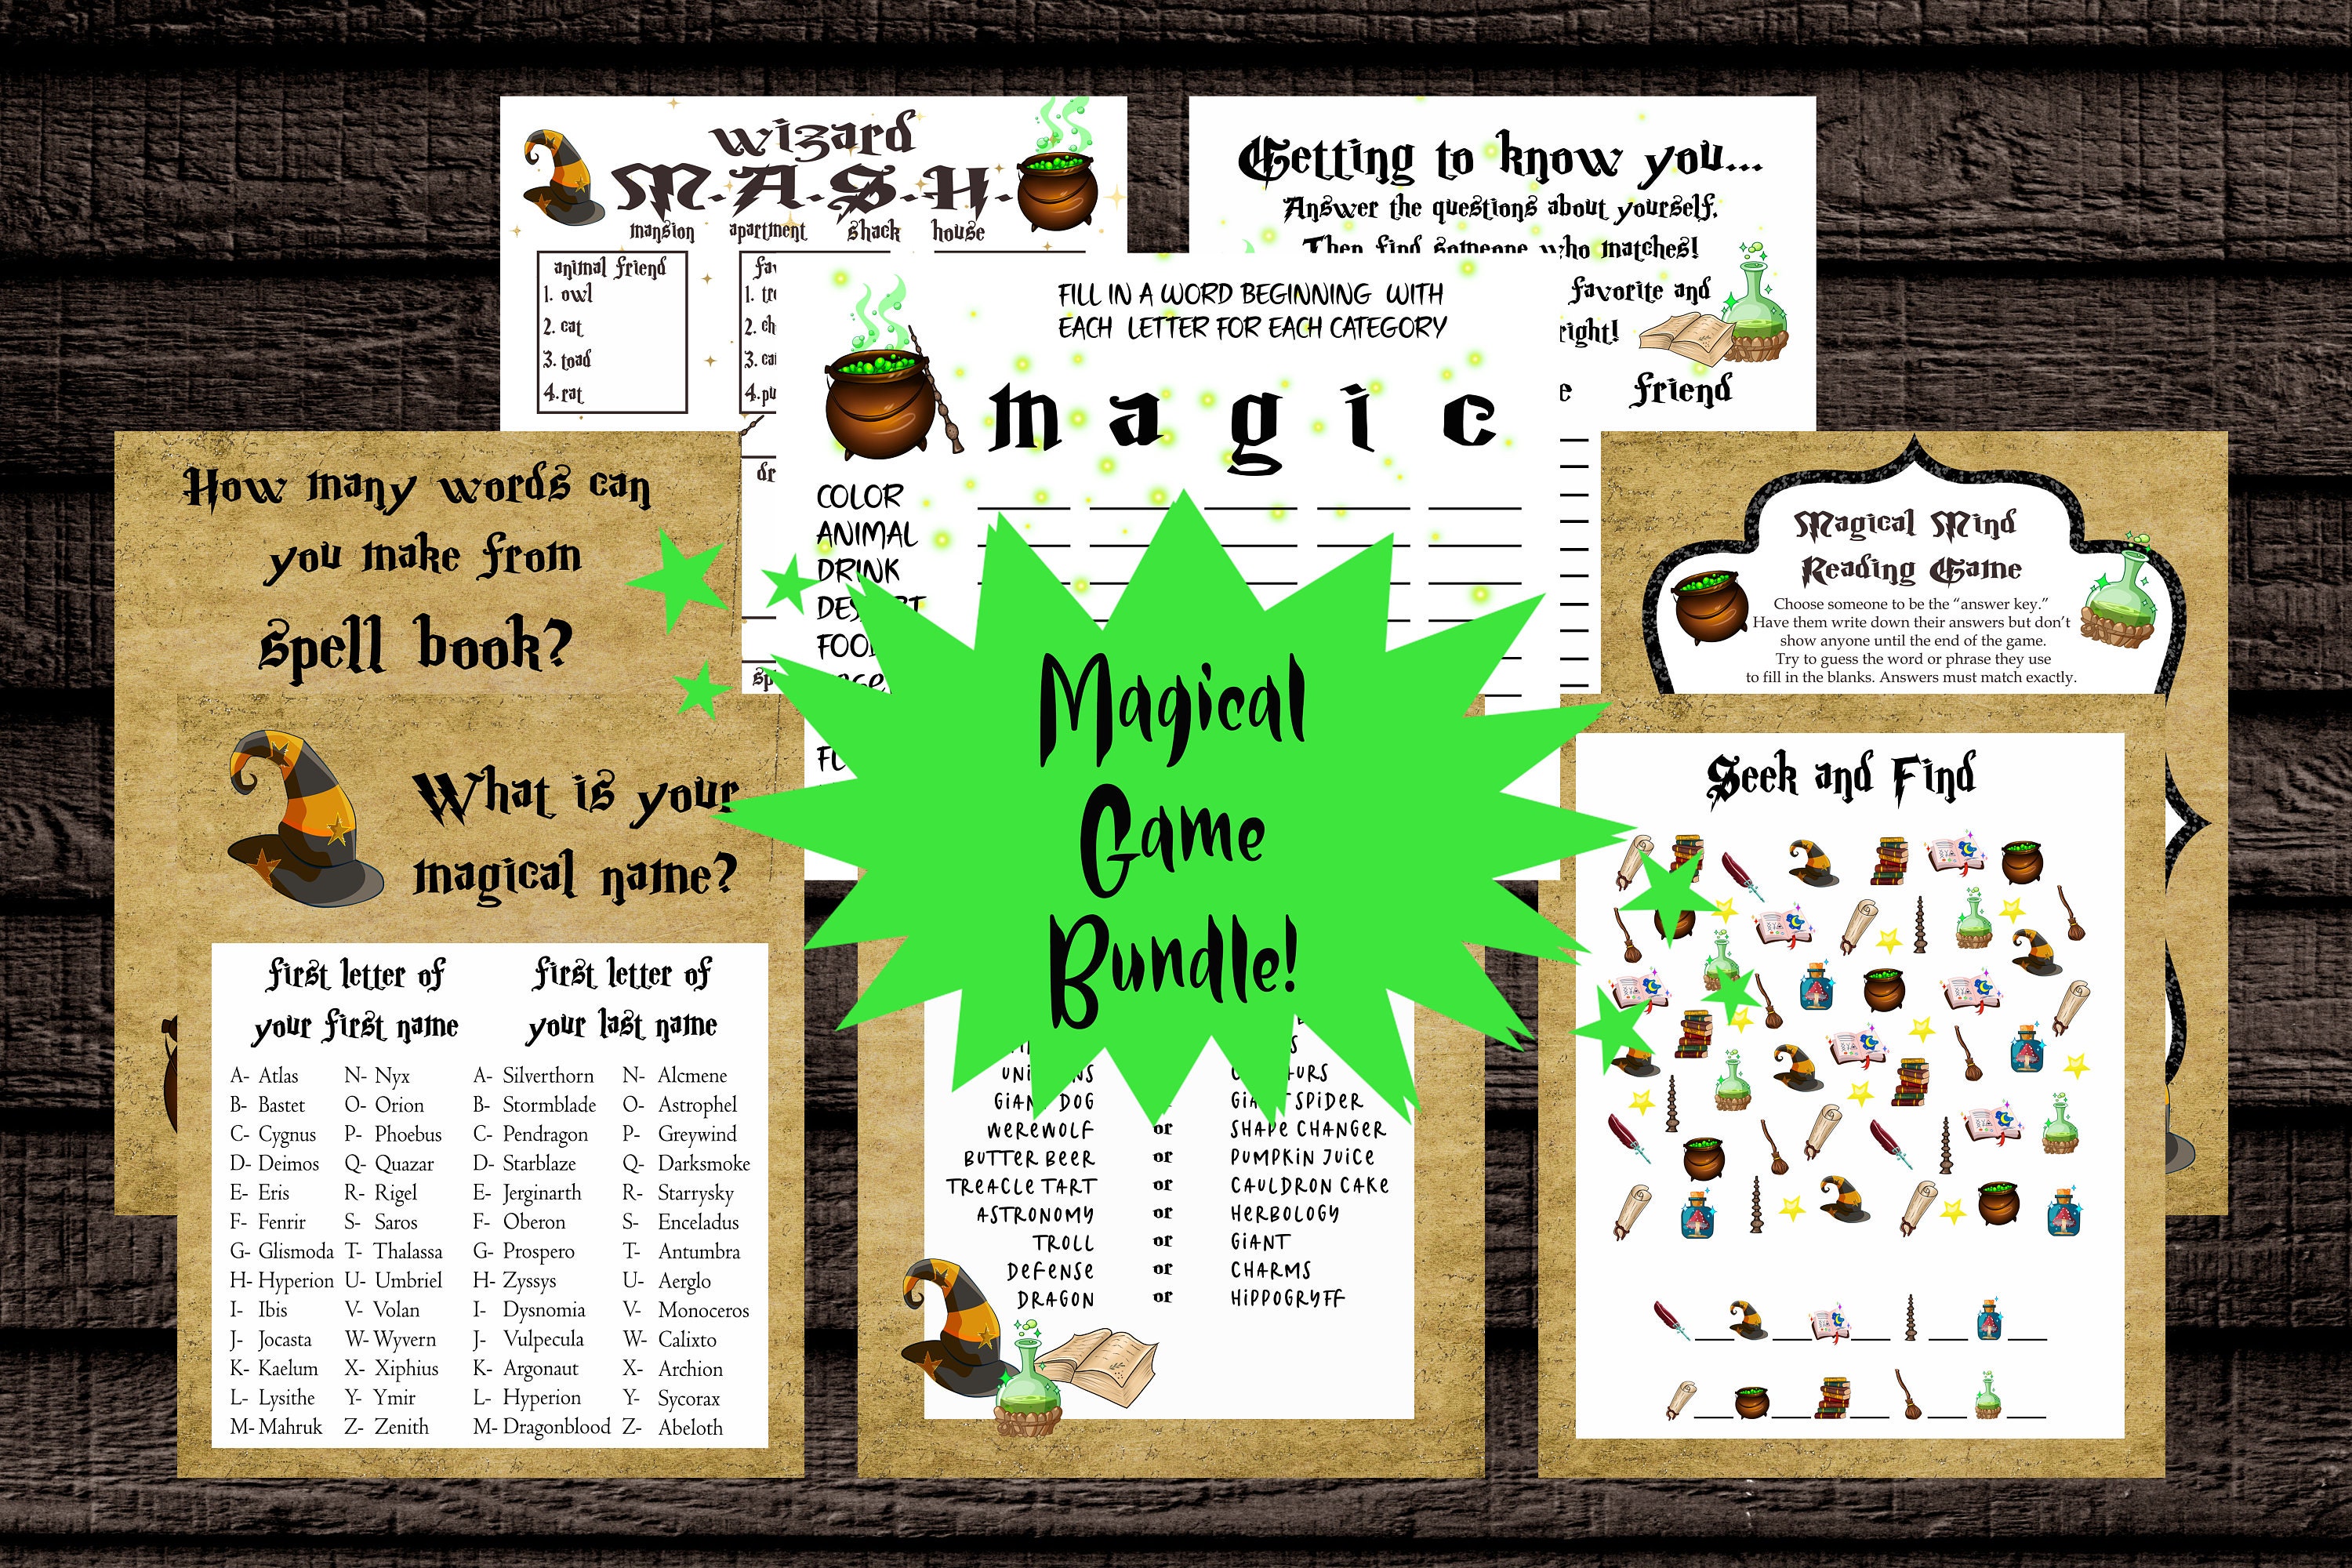  What's Your Wizard Name Game (1 Wizard Sign and 30 Name Tag  Stickers), Wizard Game Party Decoration, Birthday Game for Kids, Family Game-29  : Toys & Games